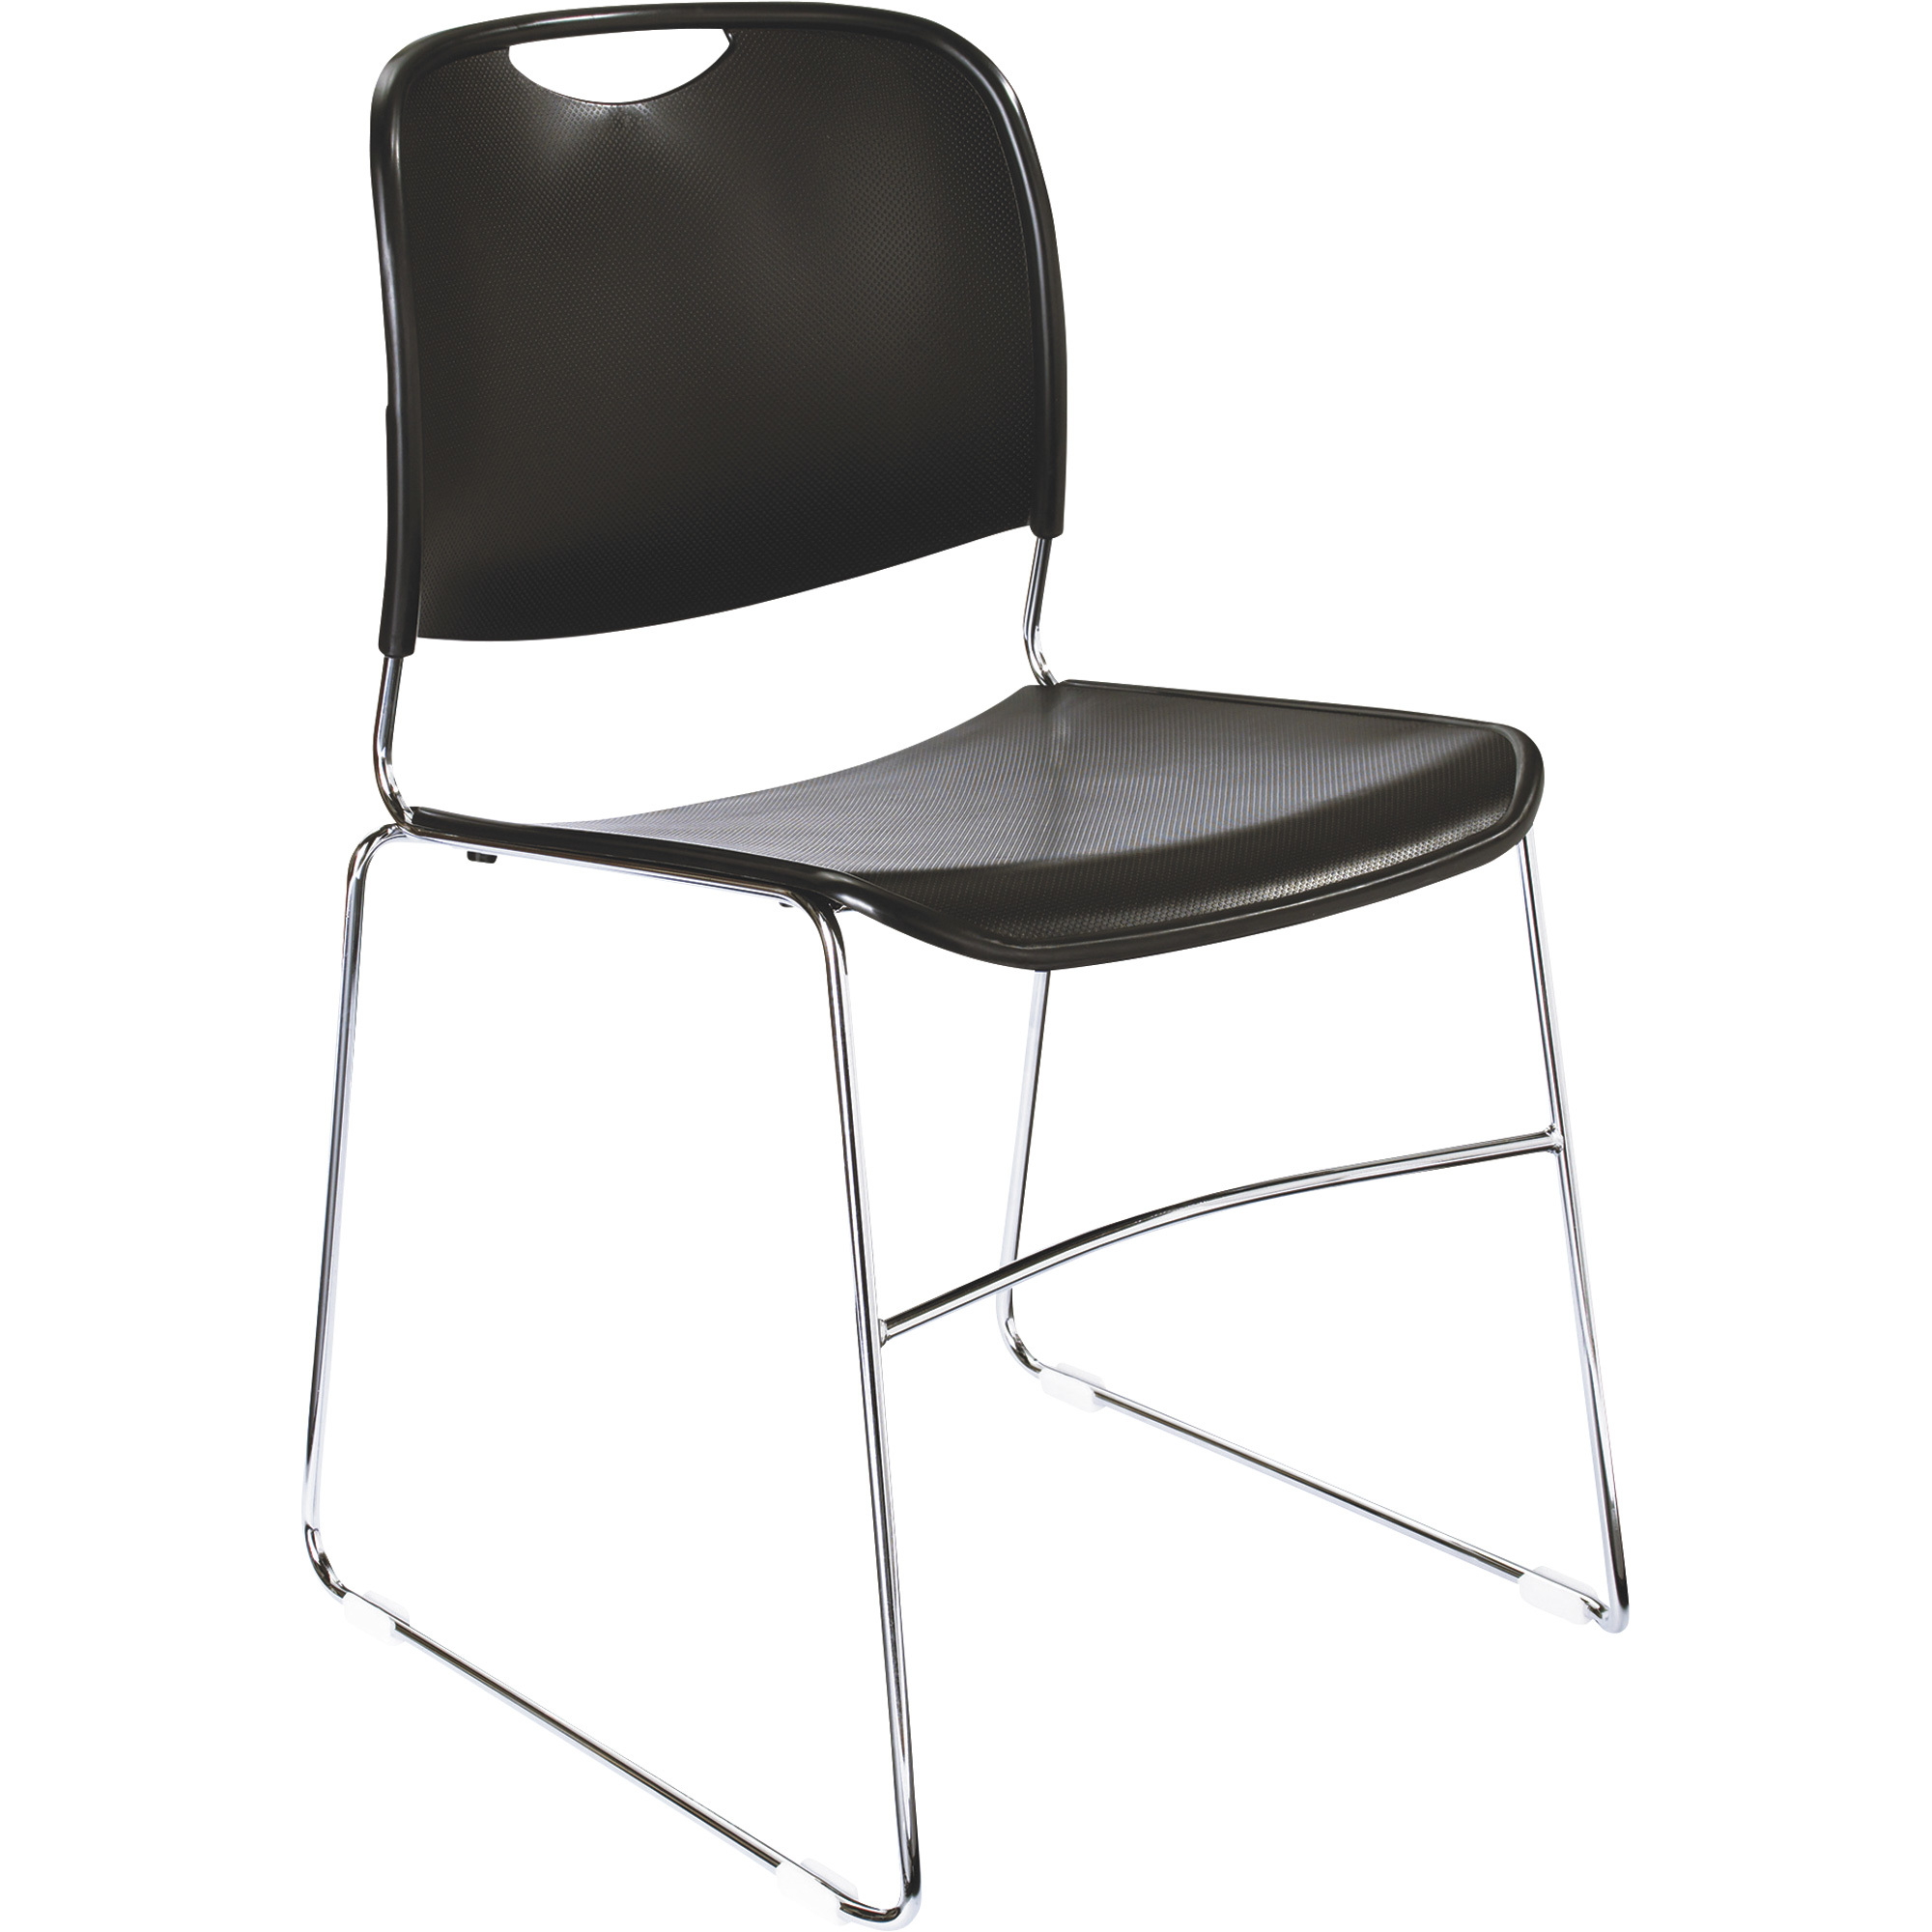 National Public Seating Compact Plastic Stack Chair with Chrome Frame â Black, Model 8510